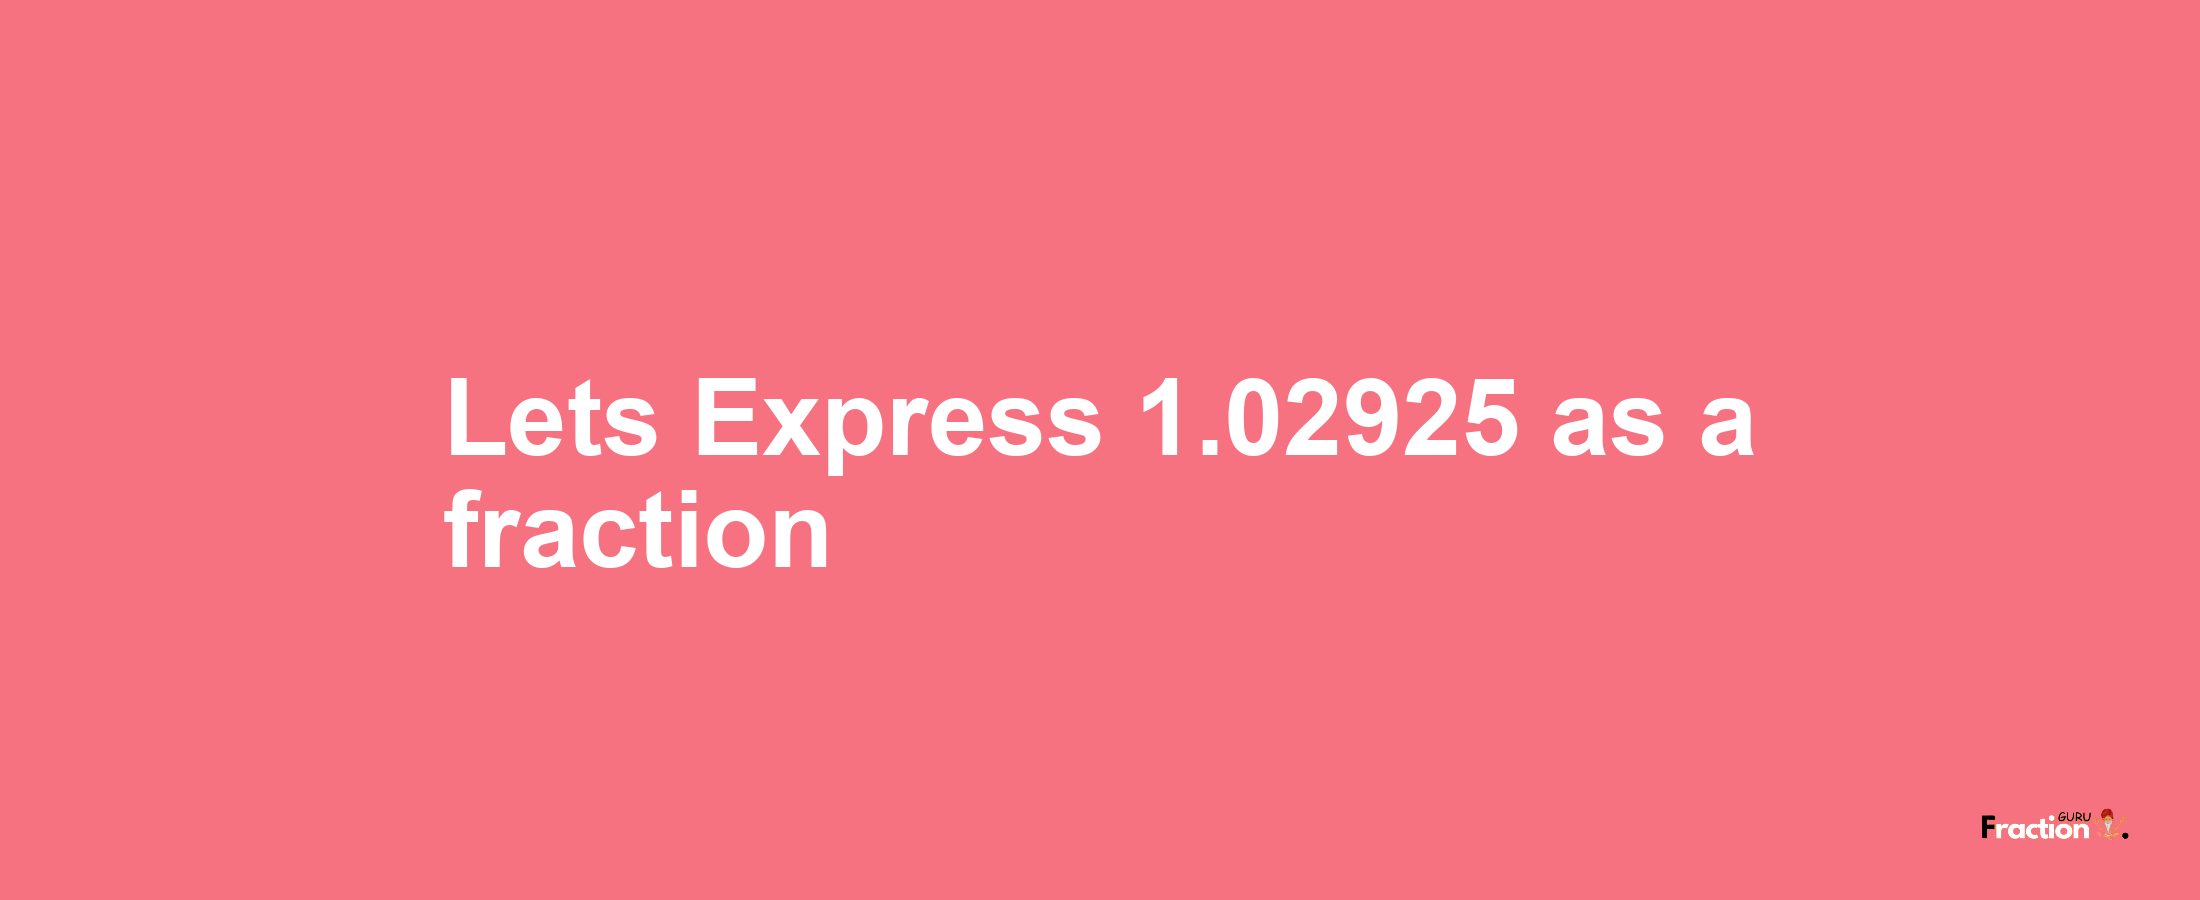 Lets Express 1.02925 as afraction